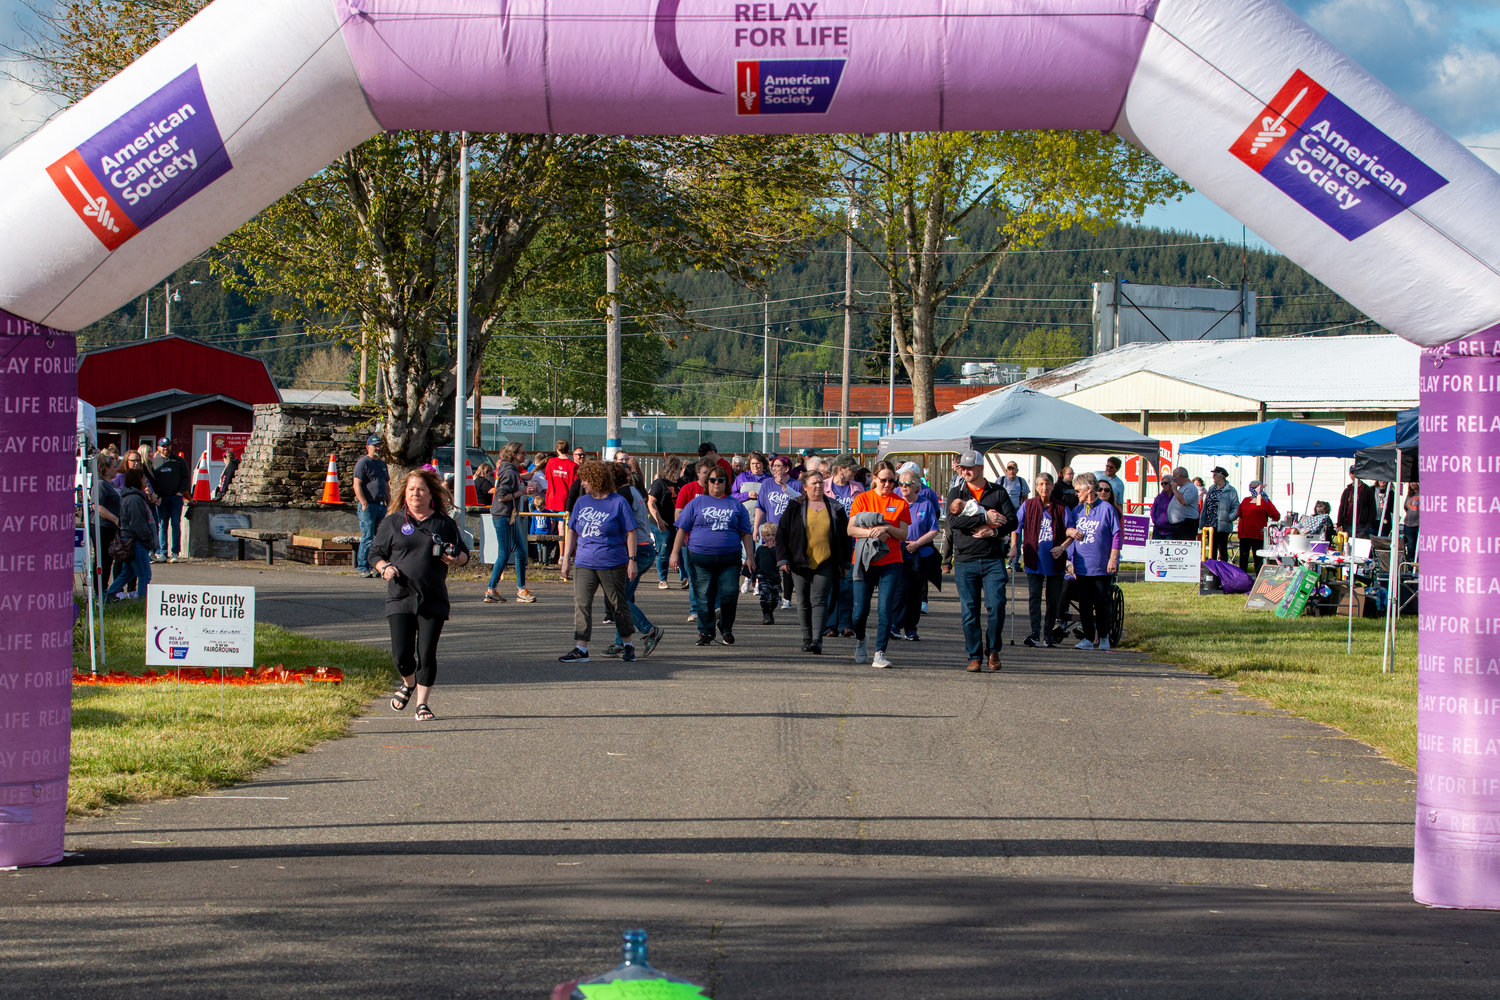 A large group of people start their first lap following the Family of the Year, Kyle and Kara Markstrom, at the Relay for Life event held at the Southwest Washington Fairgrounds Friday evening.